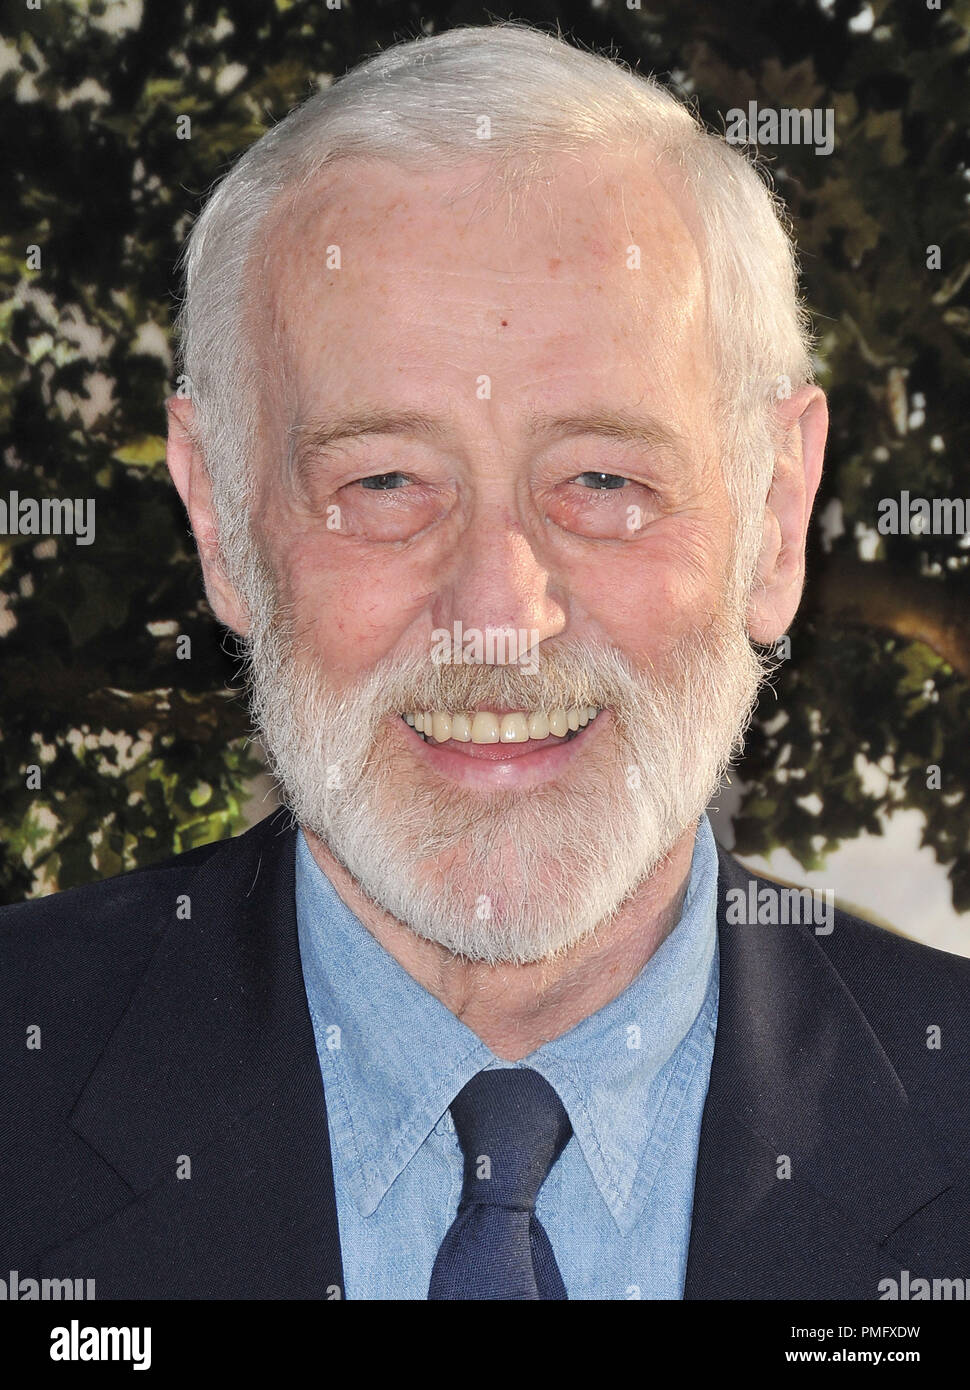 John Mahoney at the Los Angeles Premiere of 'Flipped' held at the ArcLight Cinemas Cinerama Dome in Hollywood, CA. The event took place on Monday, July 26, 2010. Photo by PRPP Pacific Rim Photo Press. File Reference # 30357 036PLX   For Editorial Use Only -  All Rights Reserved Stock Photo